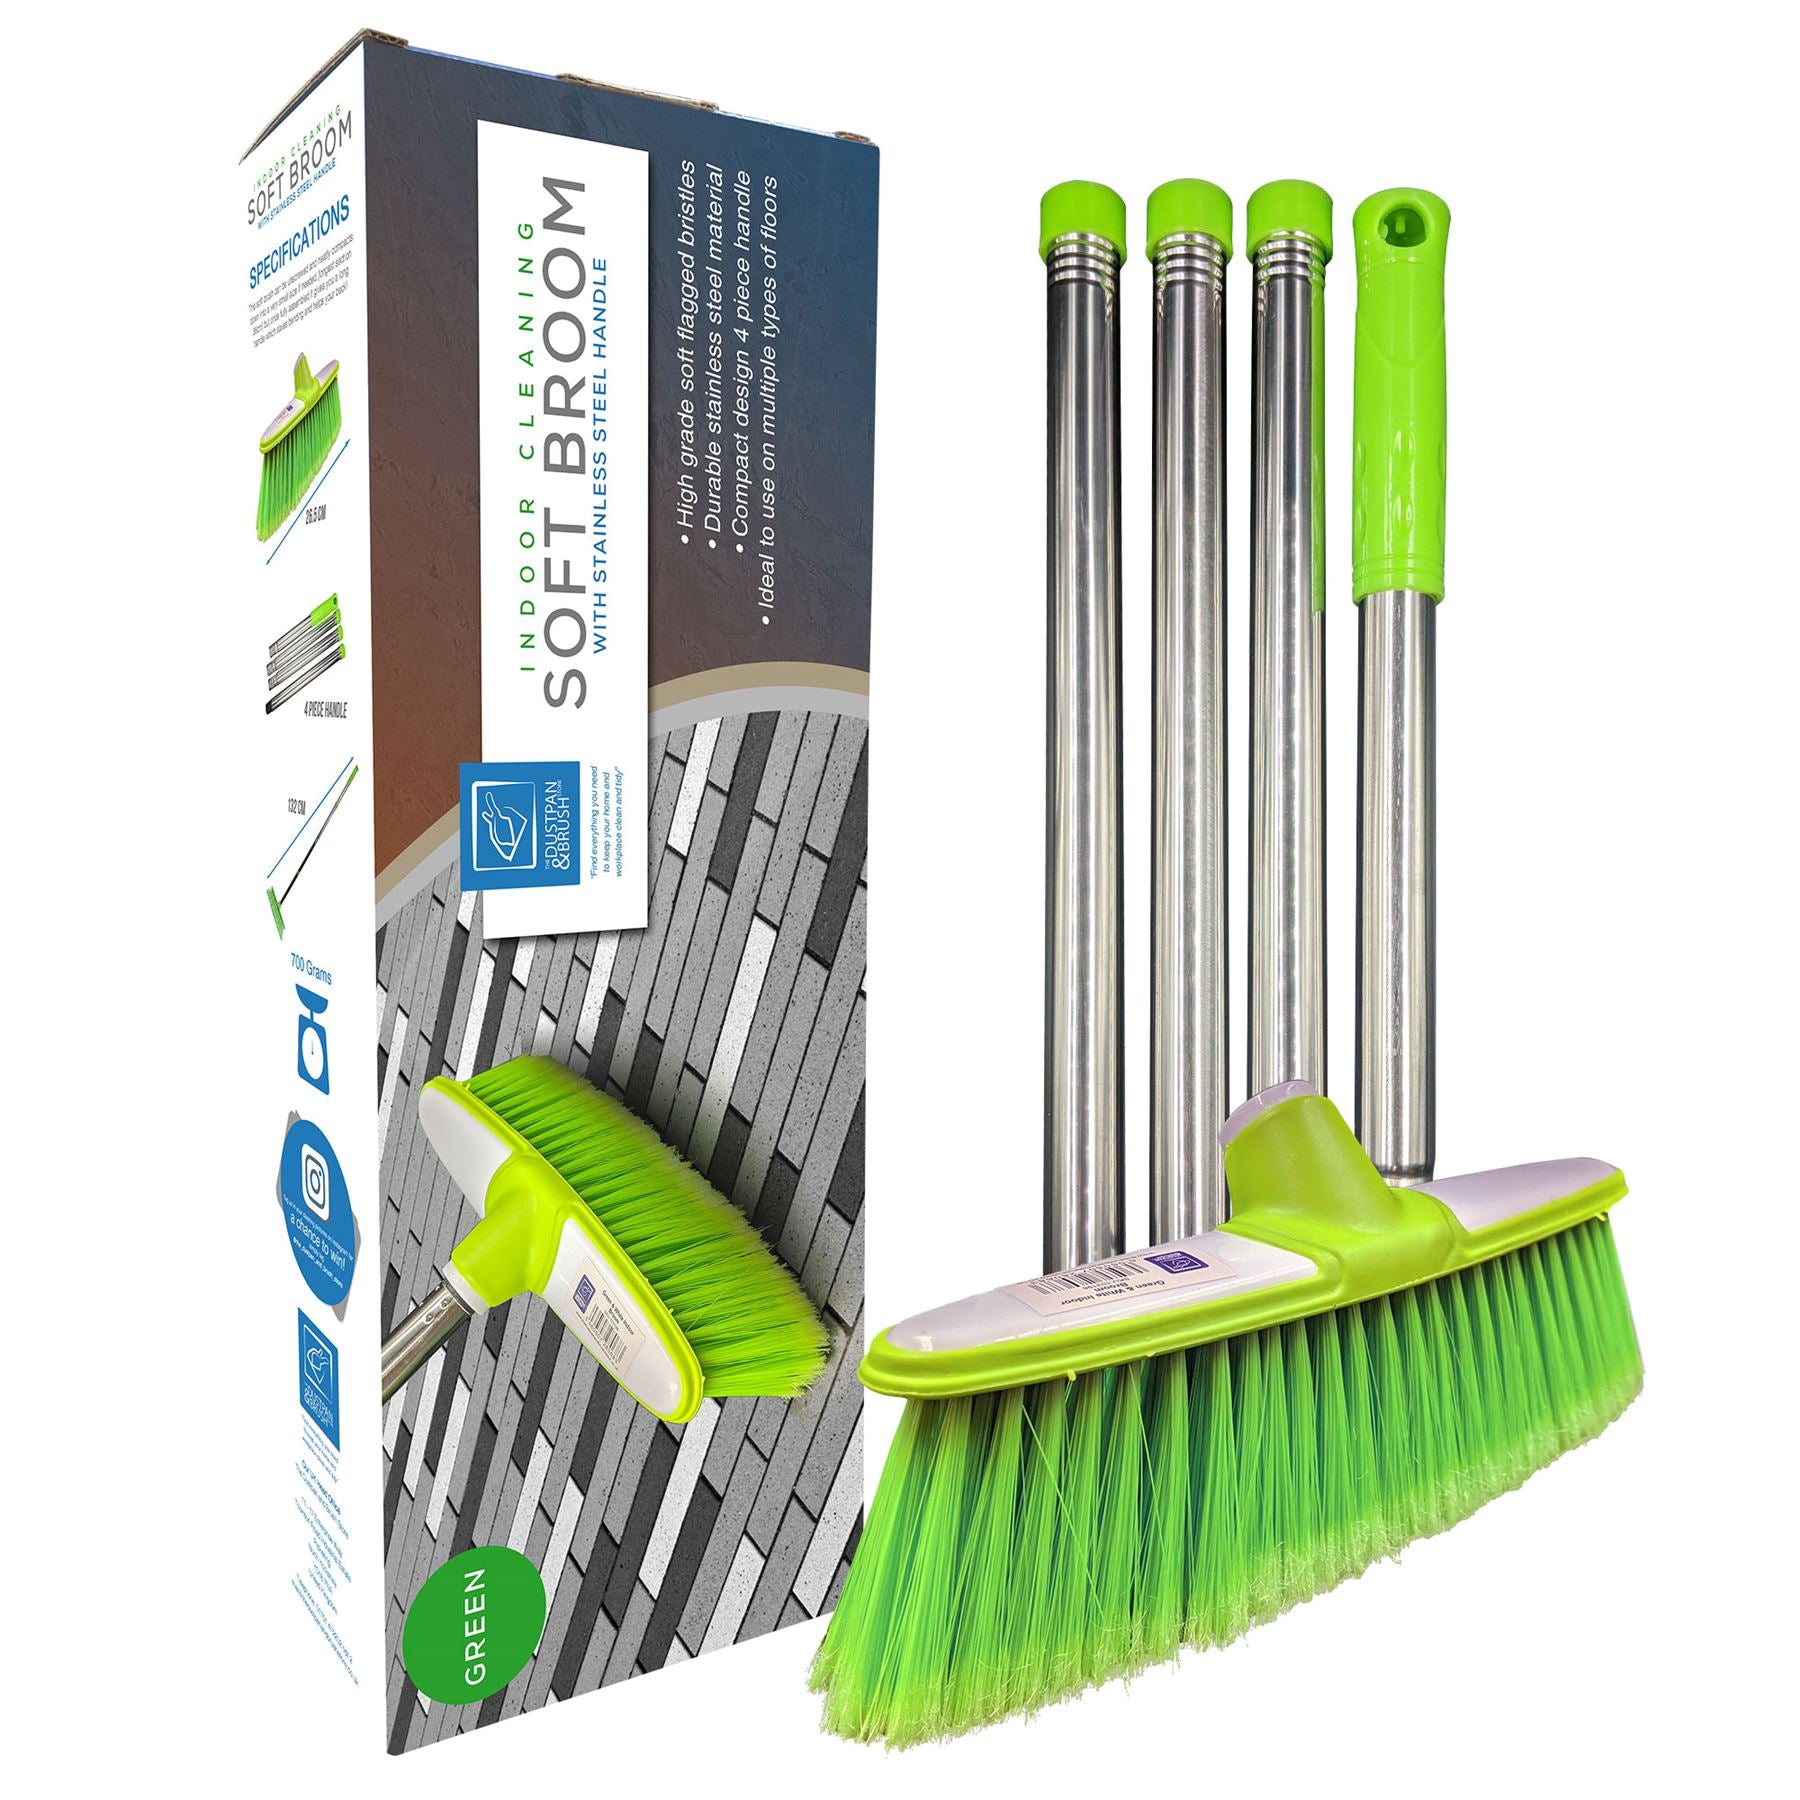 Extensible Poles and Replaceable Heads 2 in 1 Broom with Floor Brush and Window Squeegee Lightweight Solid for Cleaning Floor Wall Tiles Pet Hair【2021 Update】 Baban Sweeping Brush & Floor Squeegee 